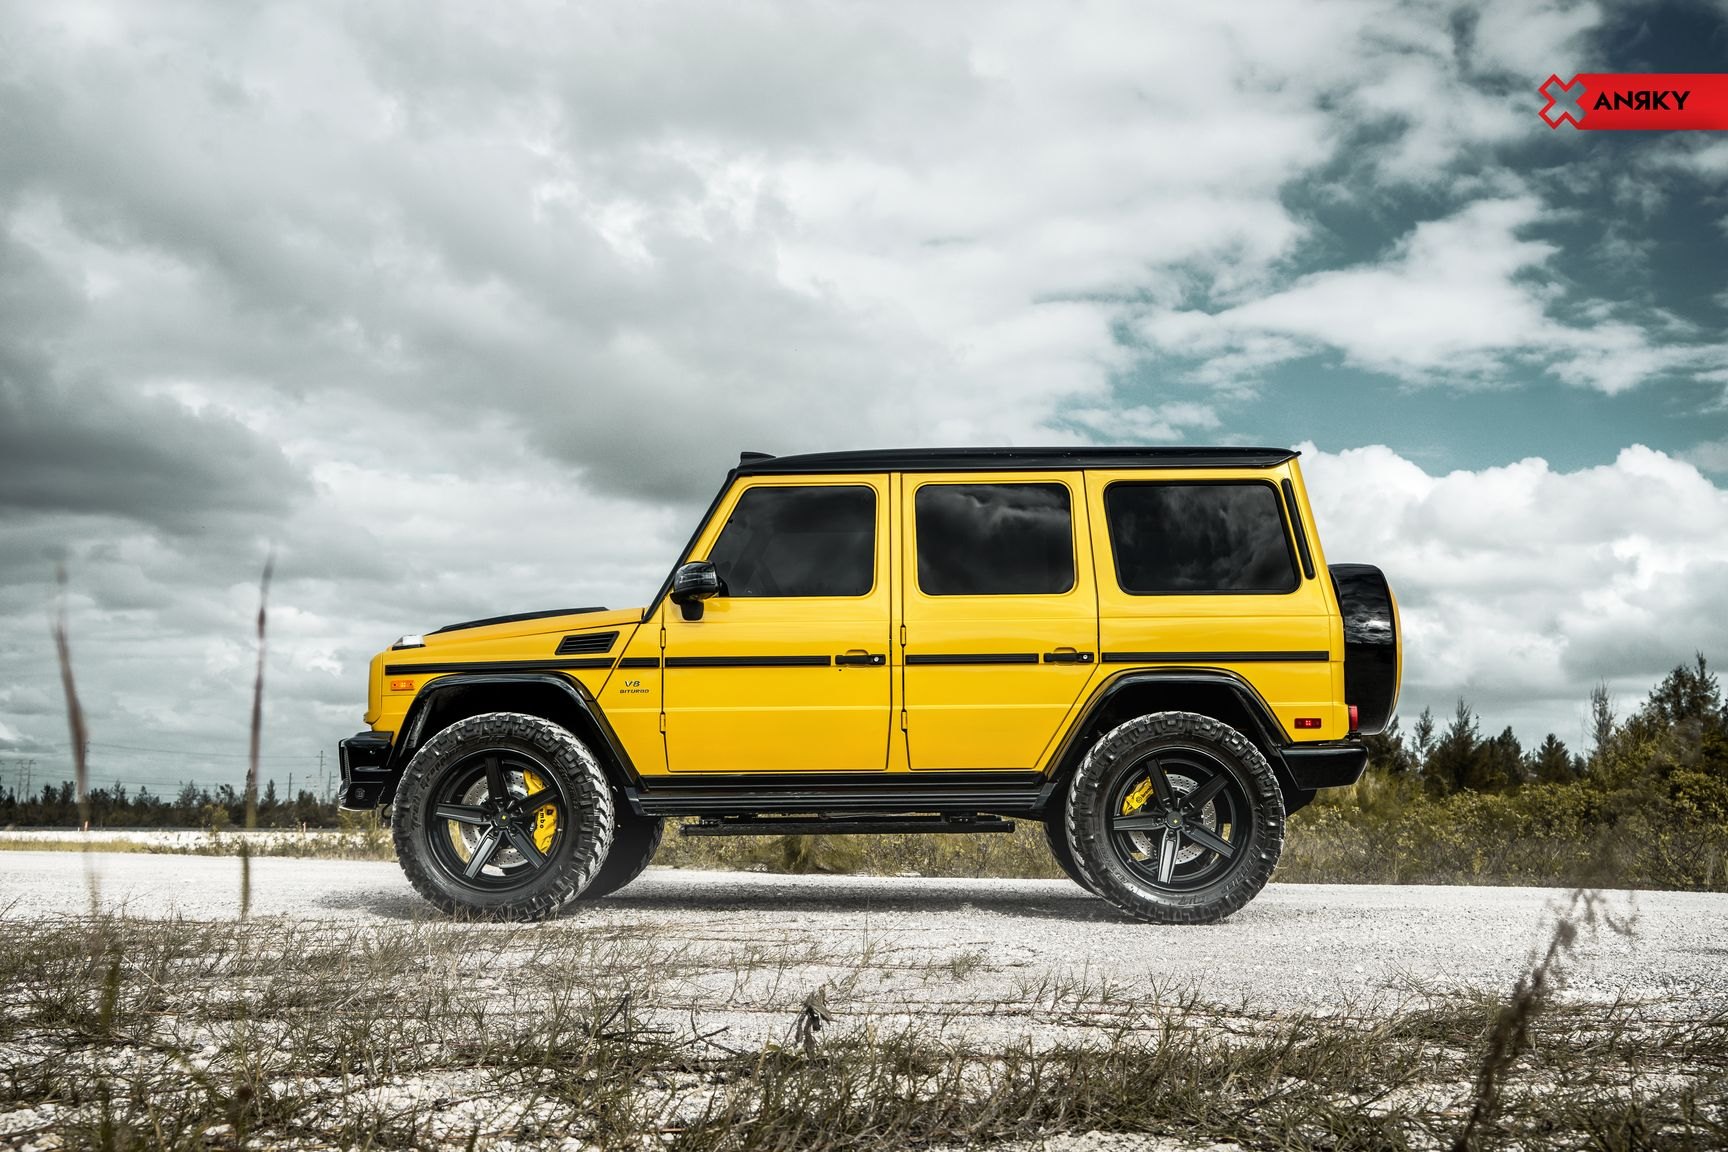 Aftermarket Running Boards on Yellow Mercedes G Class - Photo by Anrky Wheels